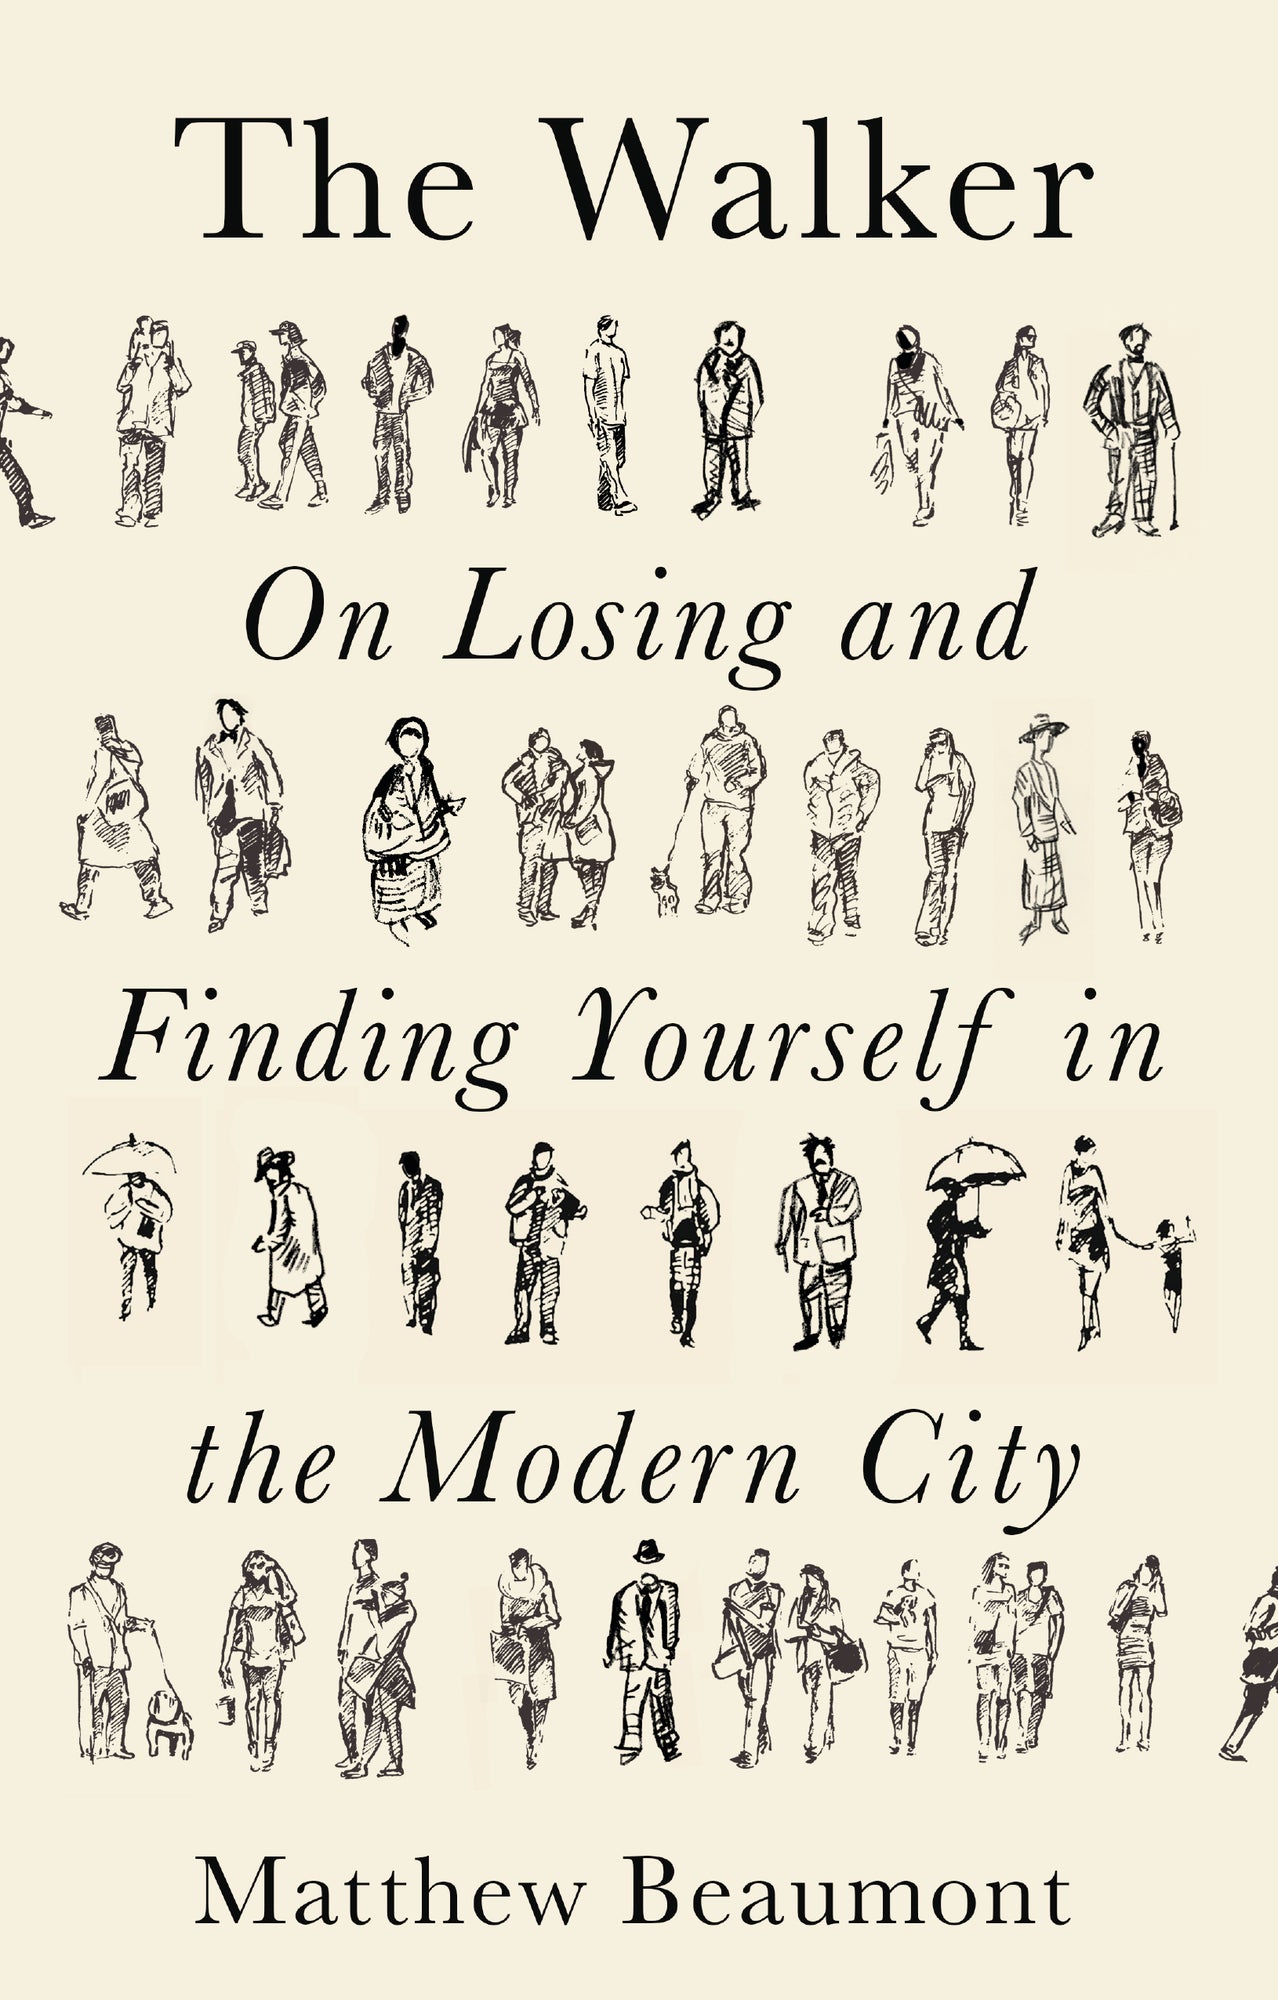 The Walker On Finding and Losing Yourself in the Modern City by Matthew Beaumont in black serif type with illustrations of people on a sand background